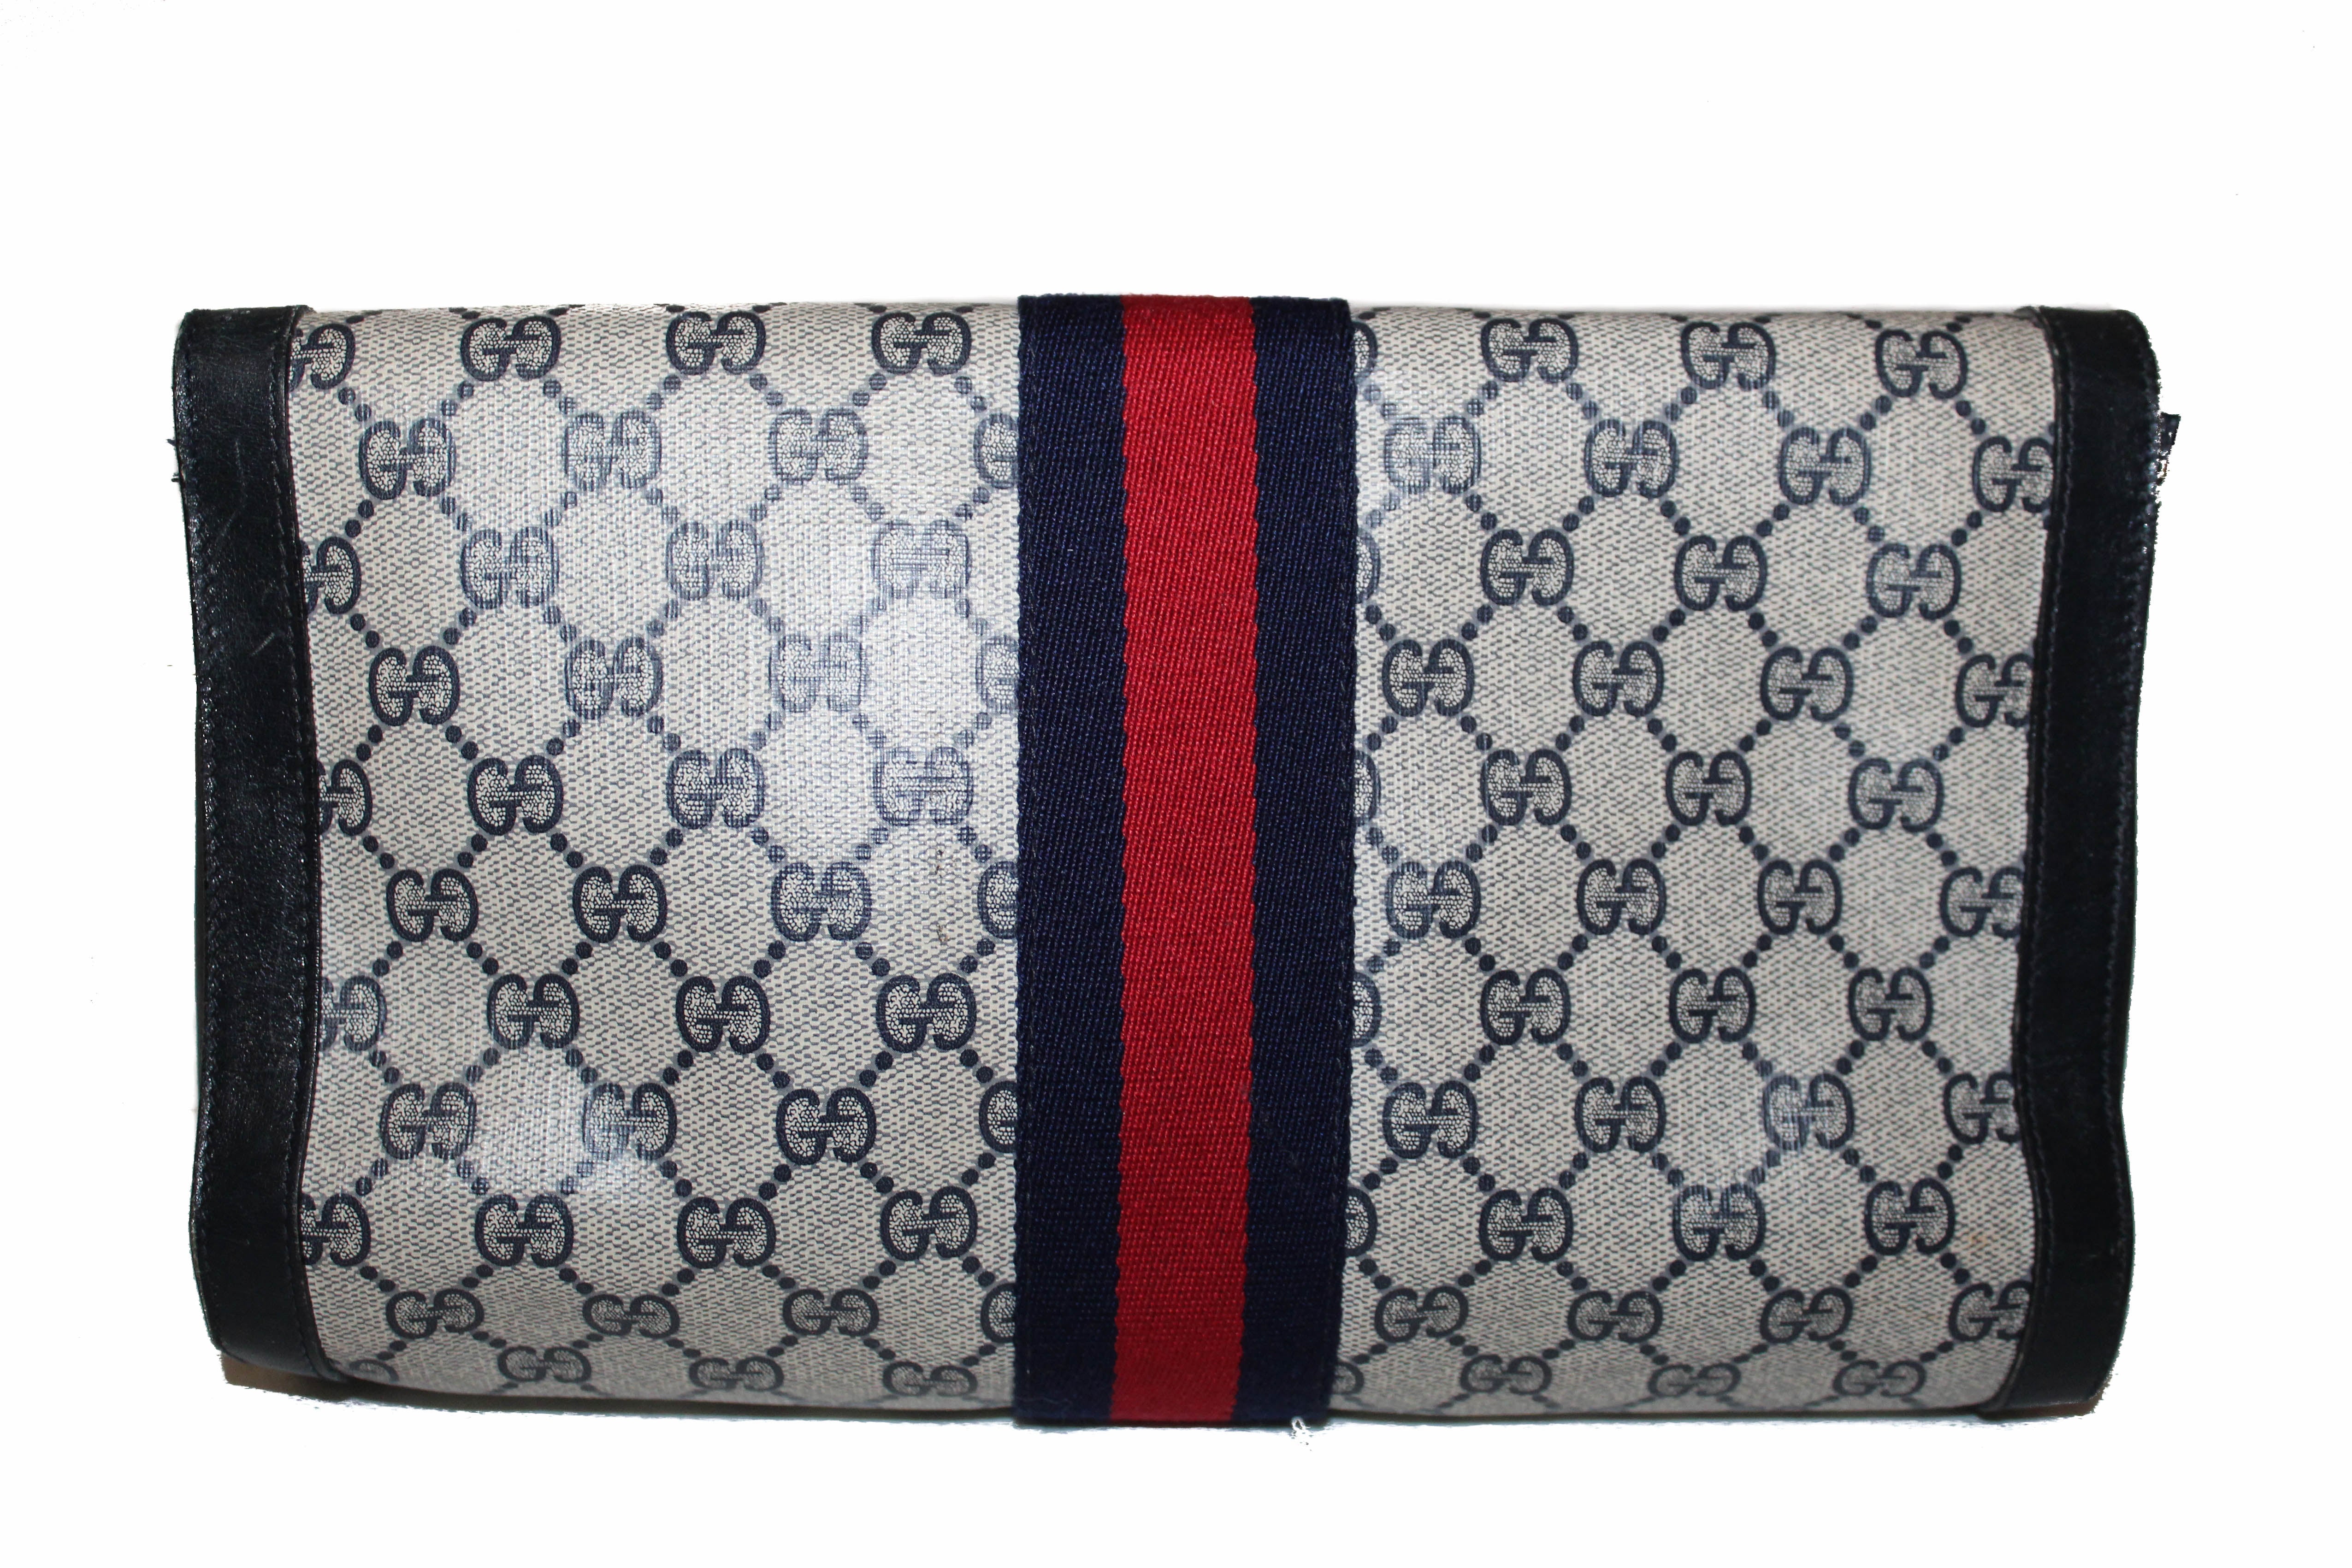 Authentic Gucci Vintage Blue and Red Web Clutch